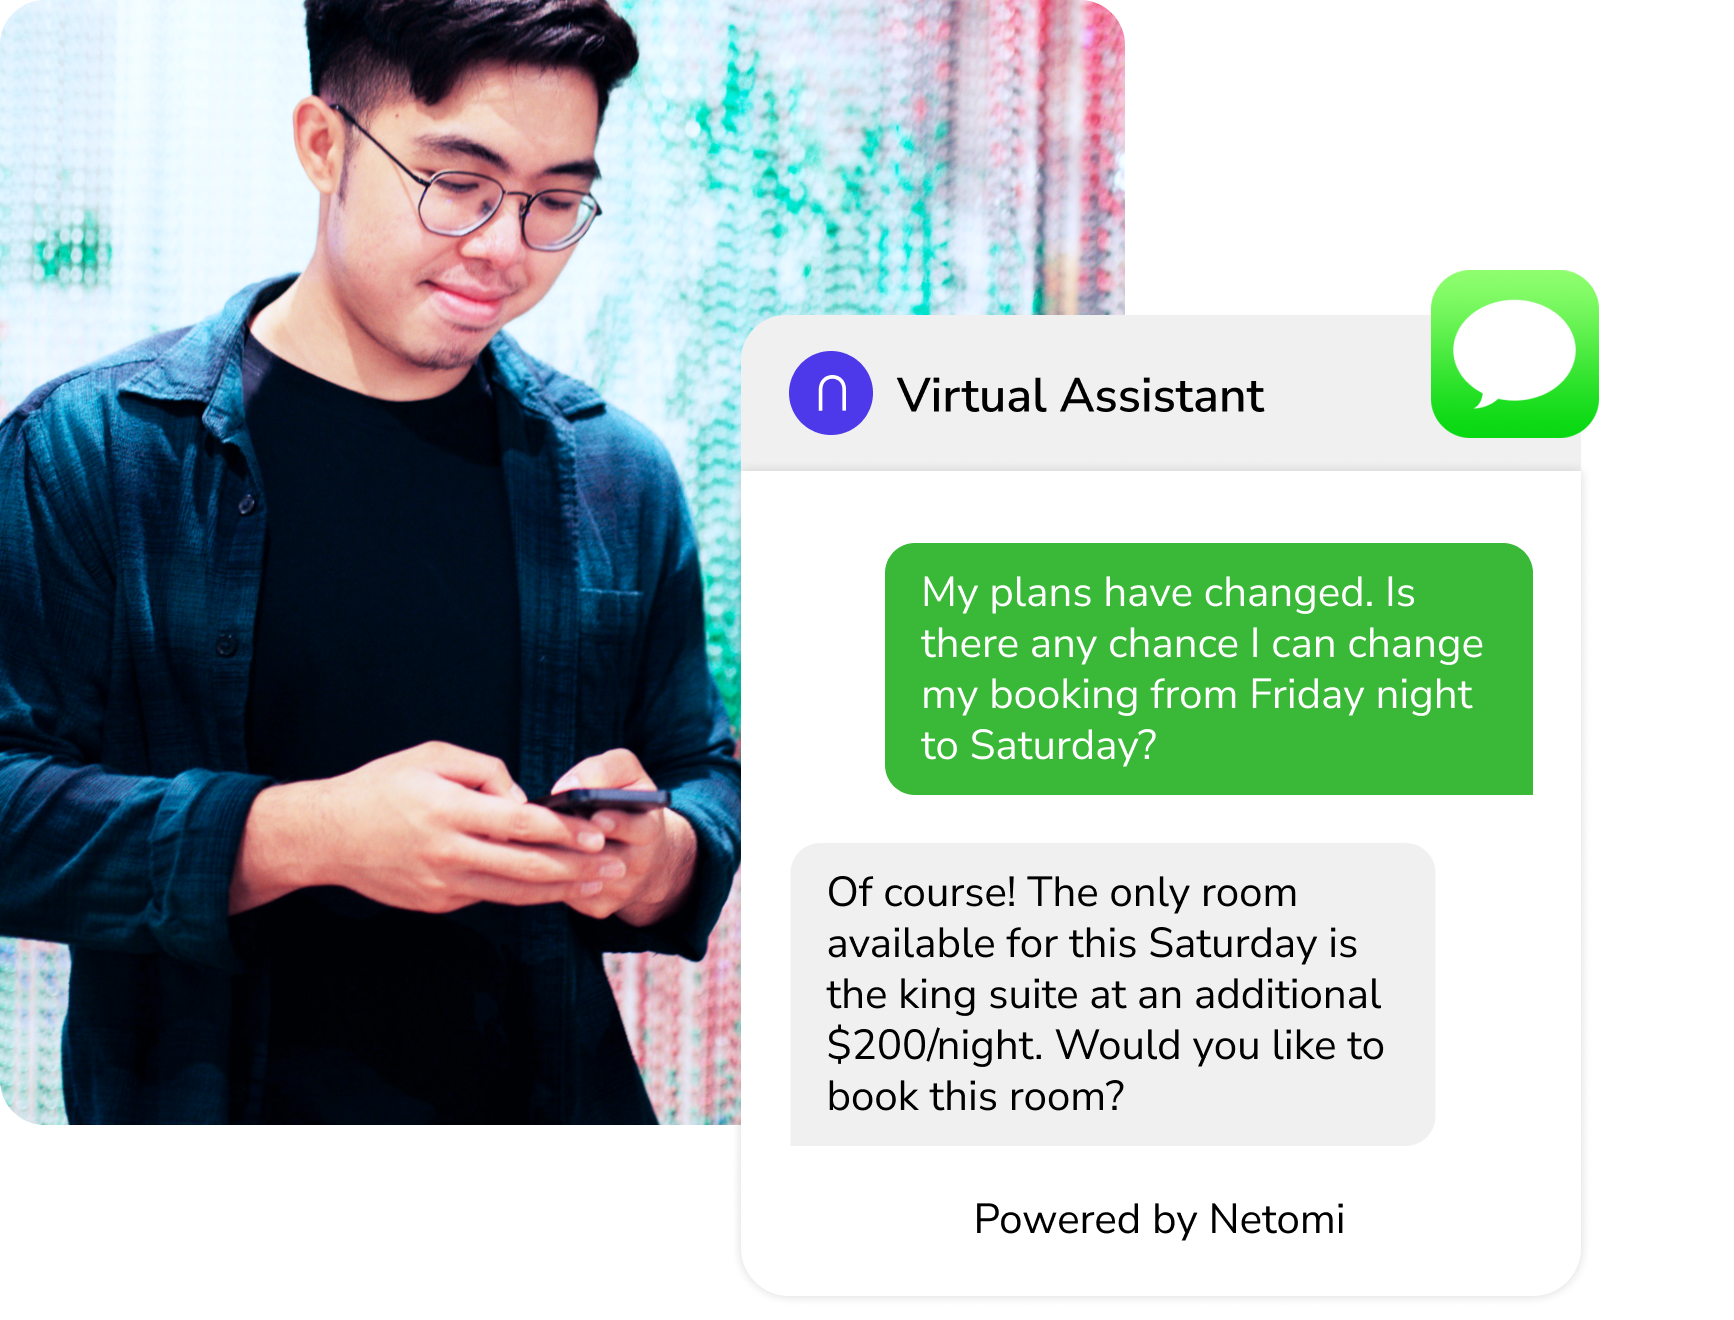 AI Customer Support integrated with SMS and text messages